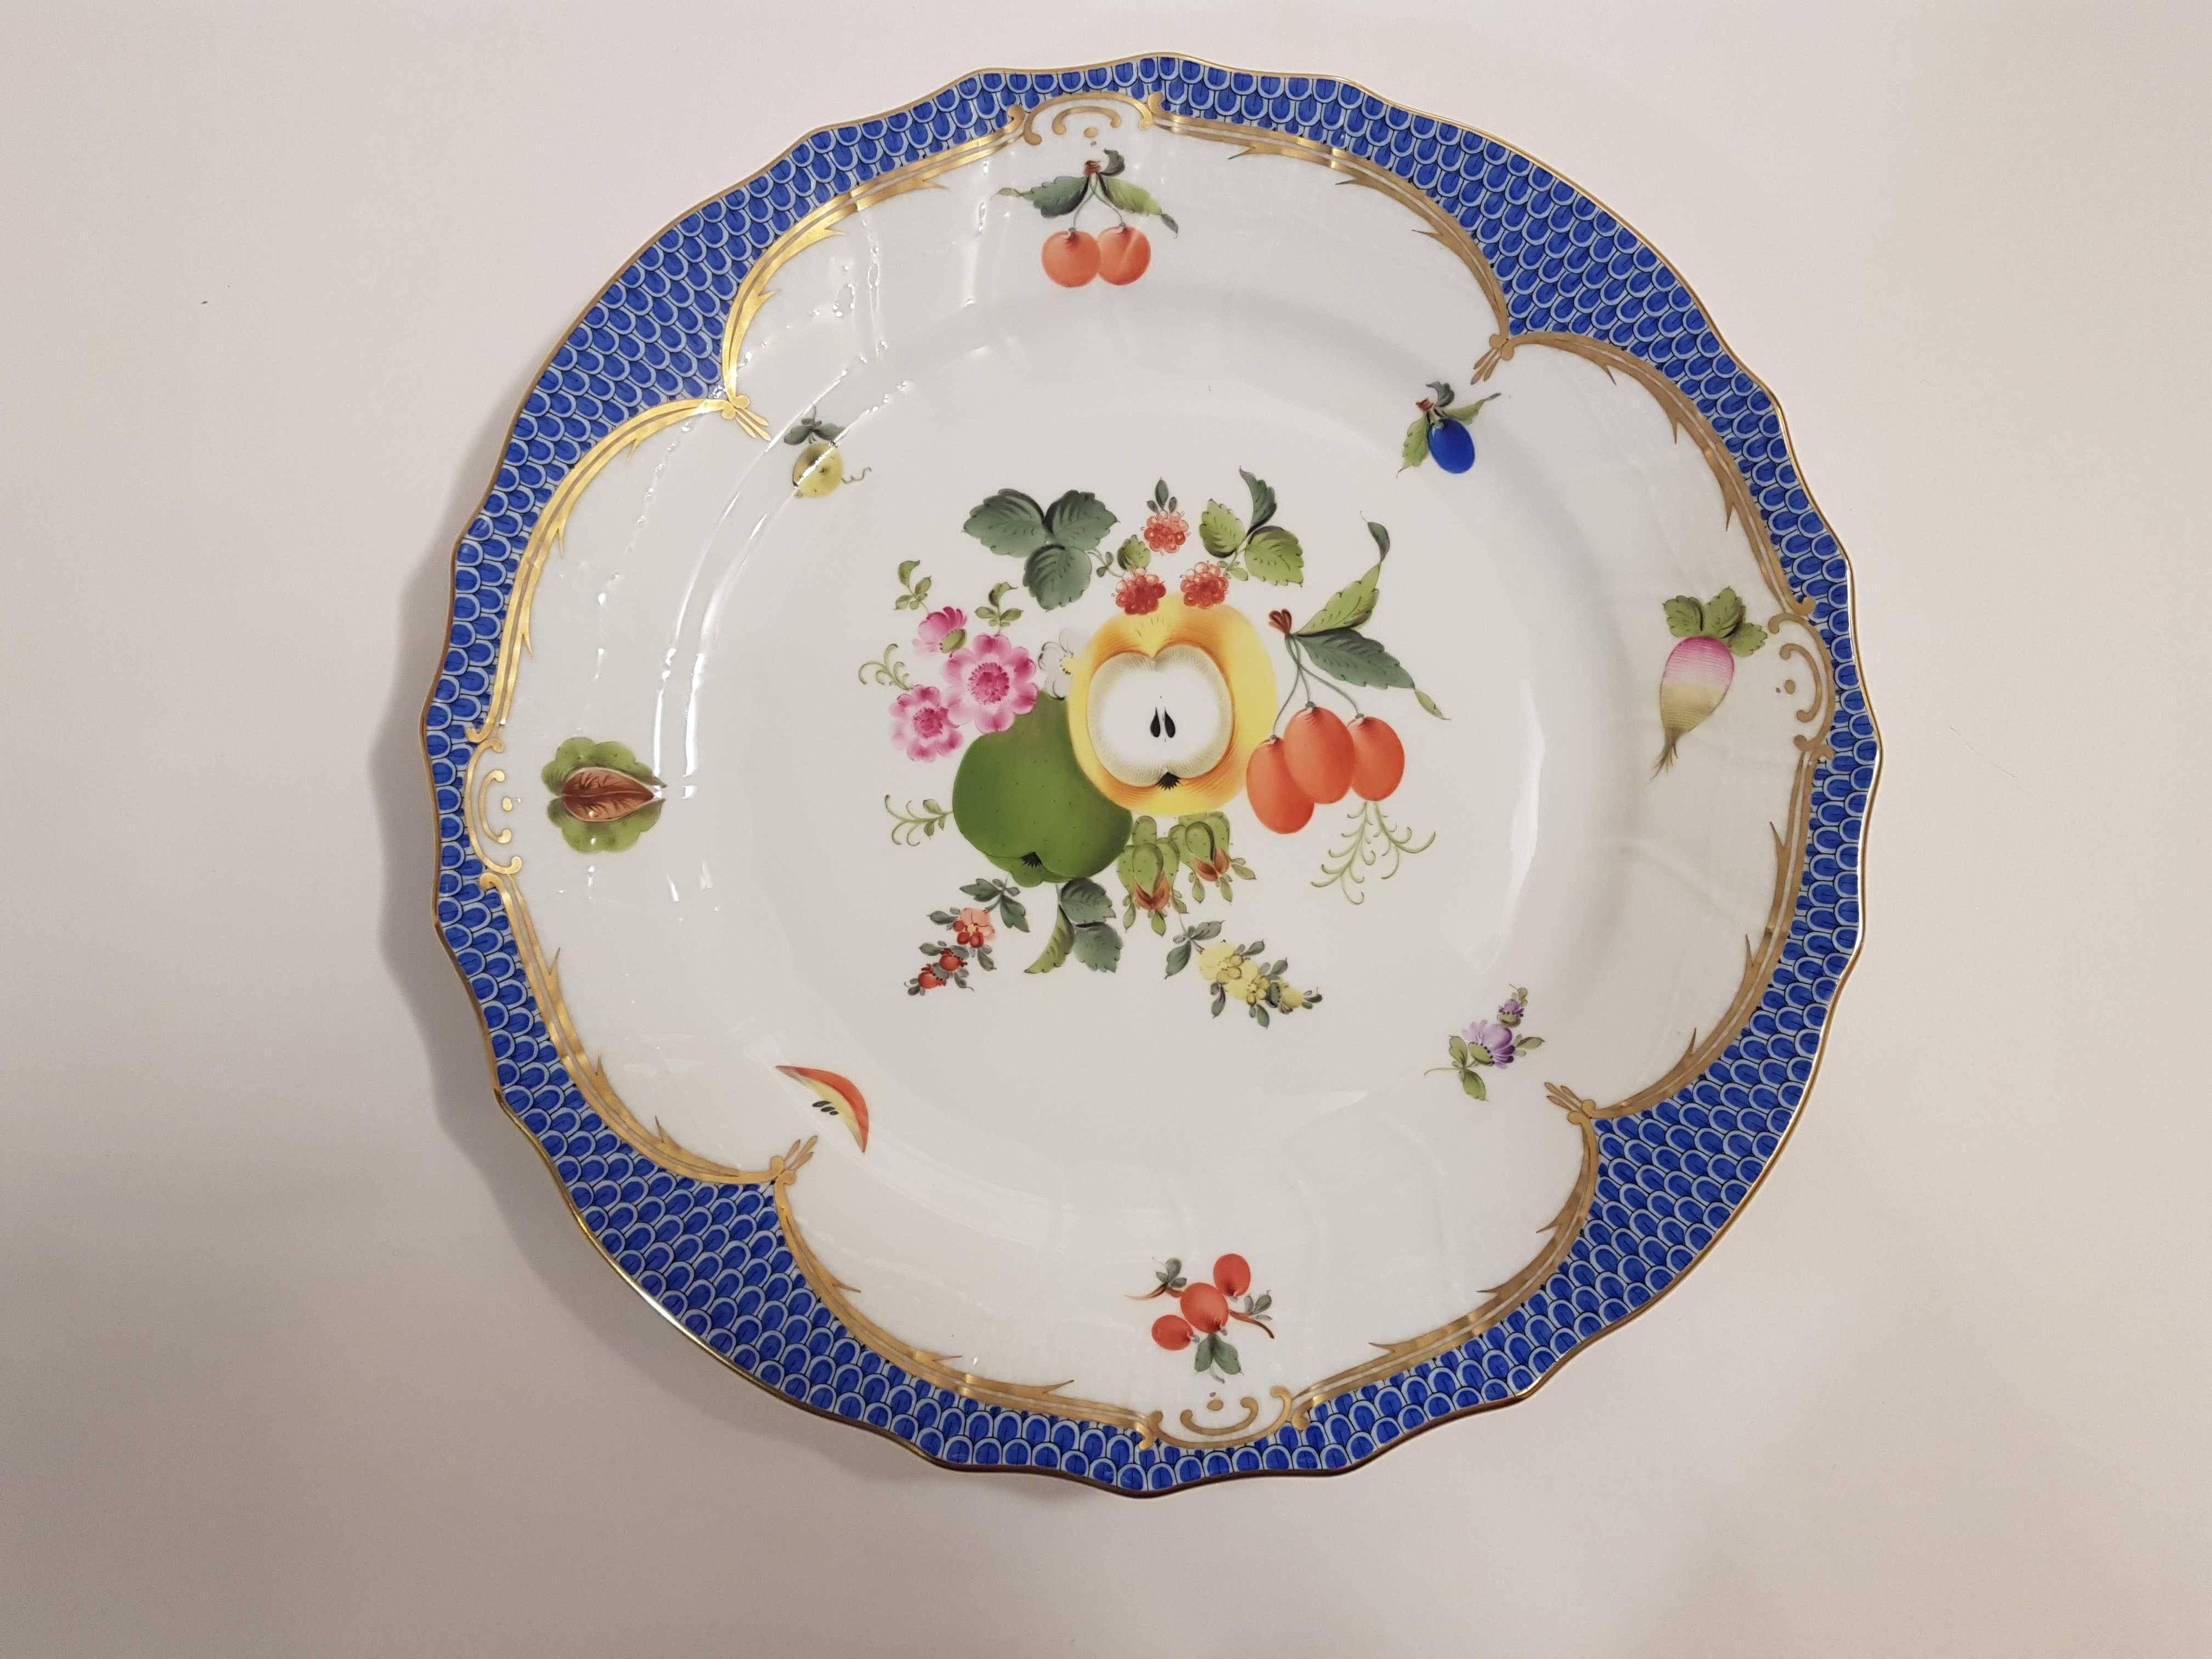 Interesting, colorful pair of hand-painted Hungarian porcelain plates to hang on wall by Herend.
